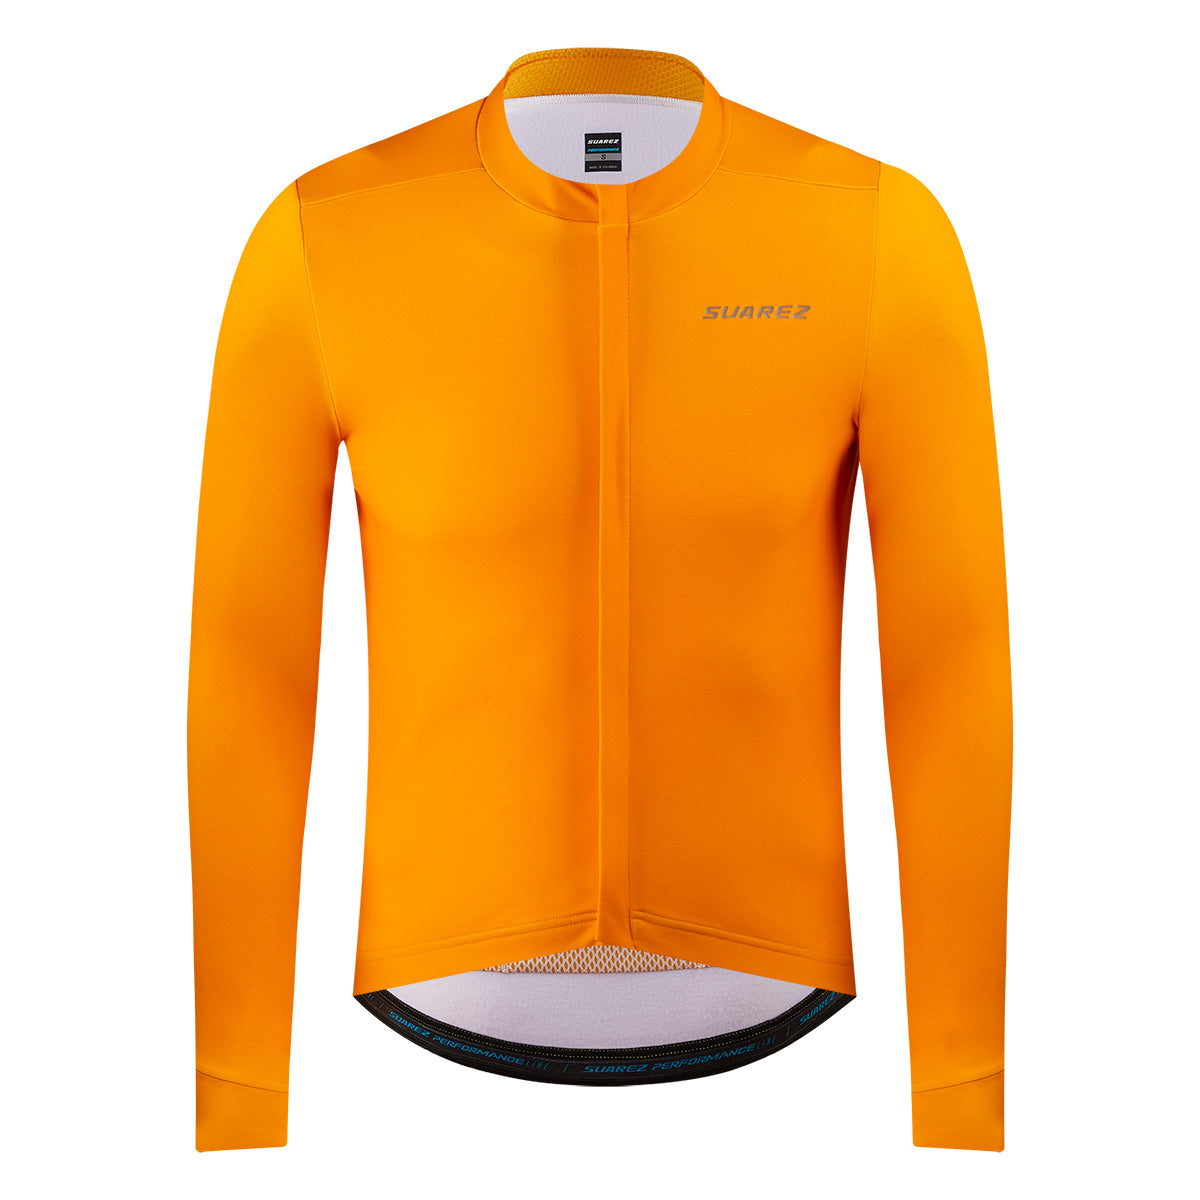 Cento Cycling: Cycling Clothing, Accessories & Custom Cycling Clothing